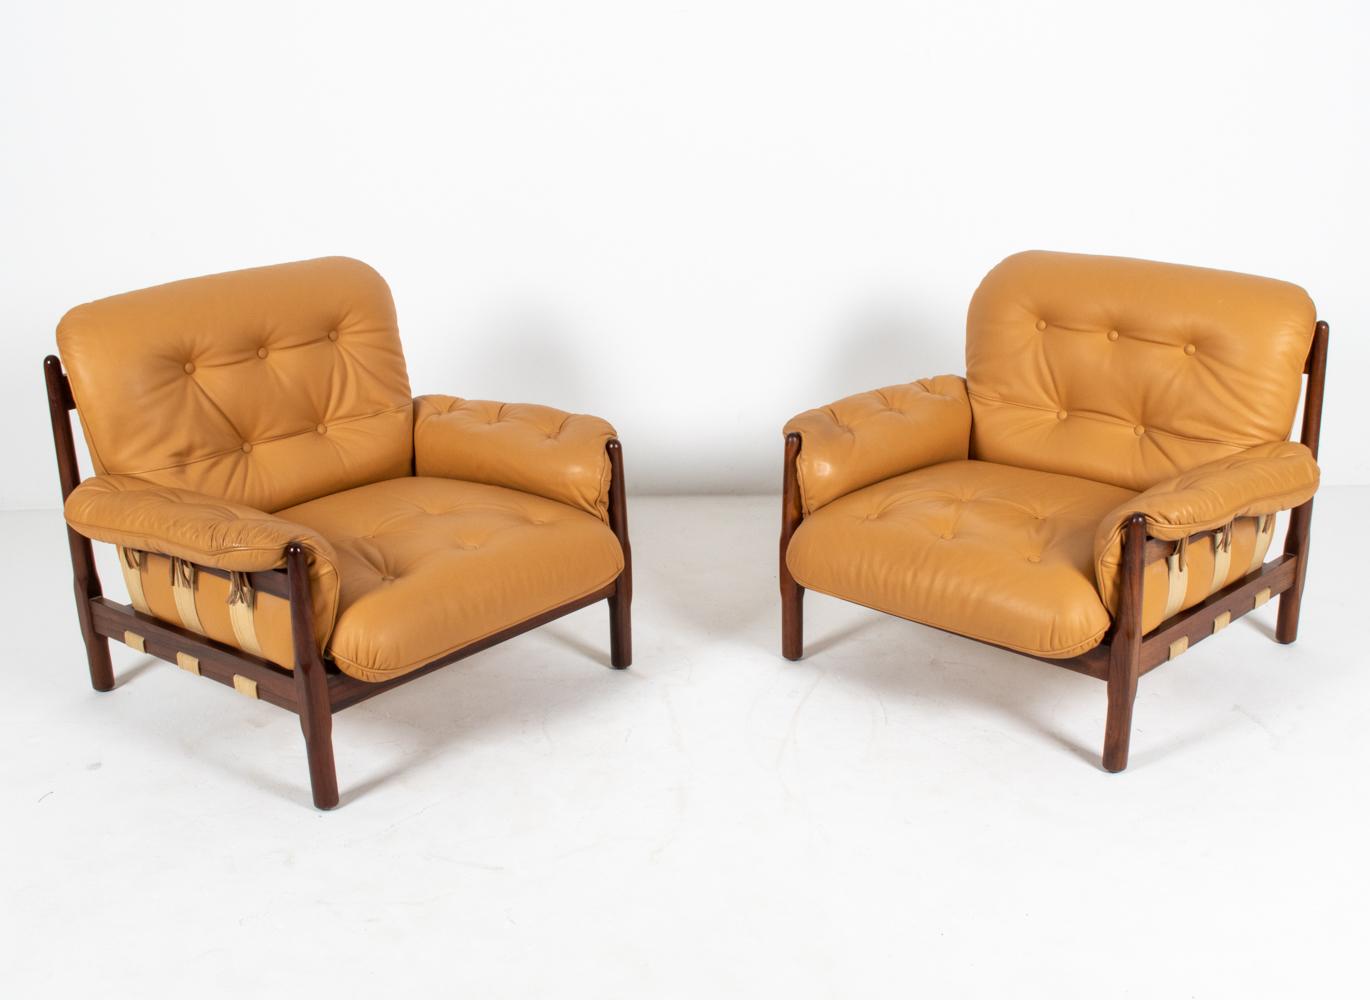 Generous proportions and luxurious finishes set this fabulous pair of Brazilian Modernist lounge chairs apart from the rest. The frames are crafted from gorgeous solid rosewood, with interesting sculptural chamfering at the legs. The tufted cushions